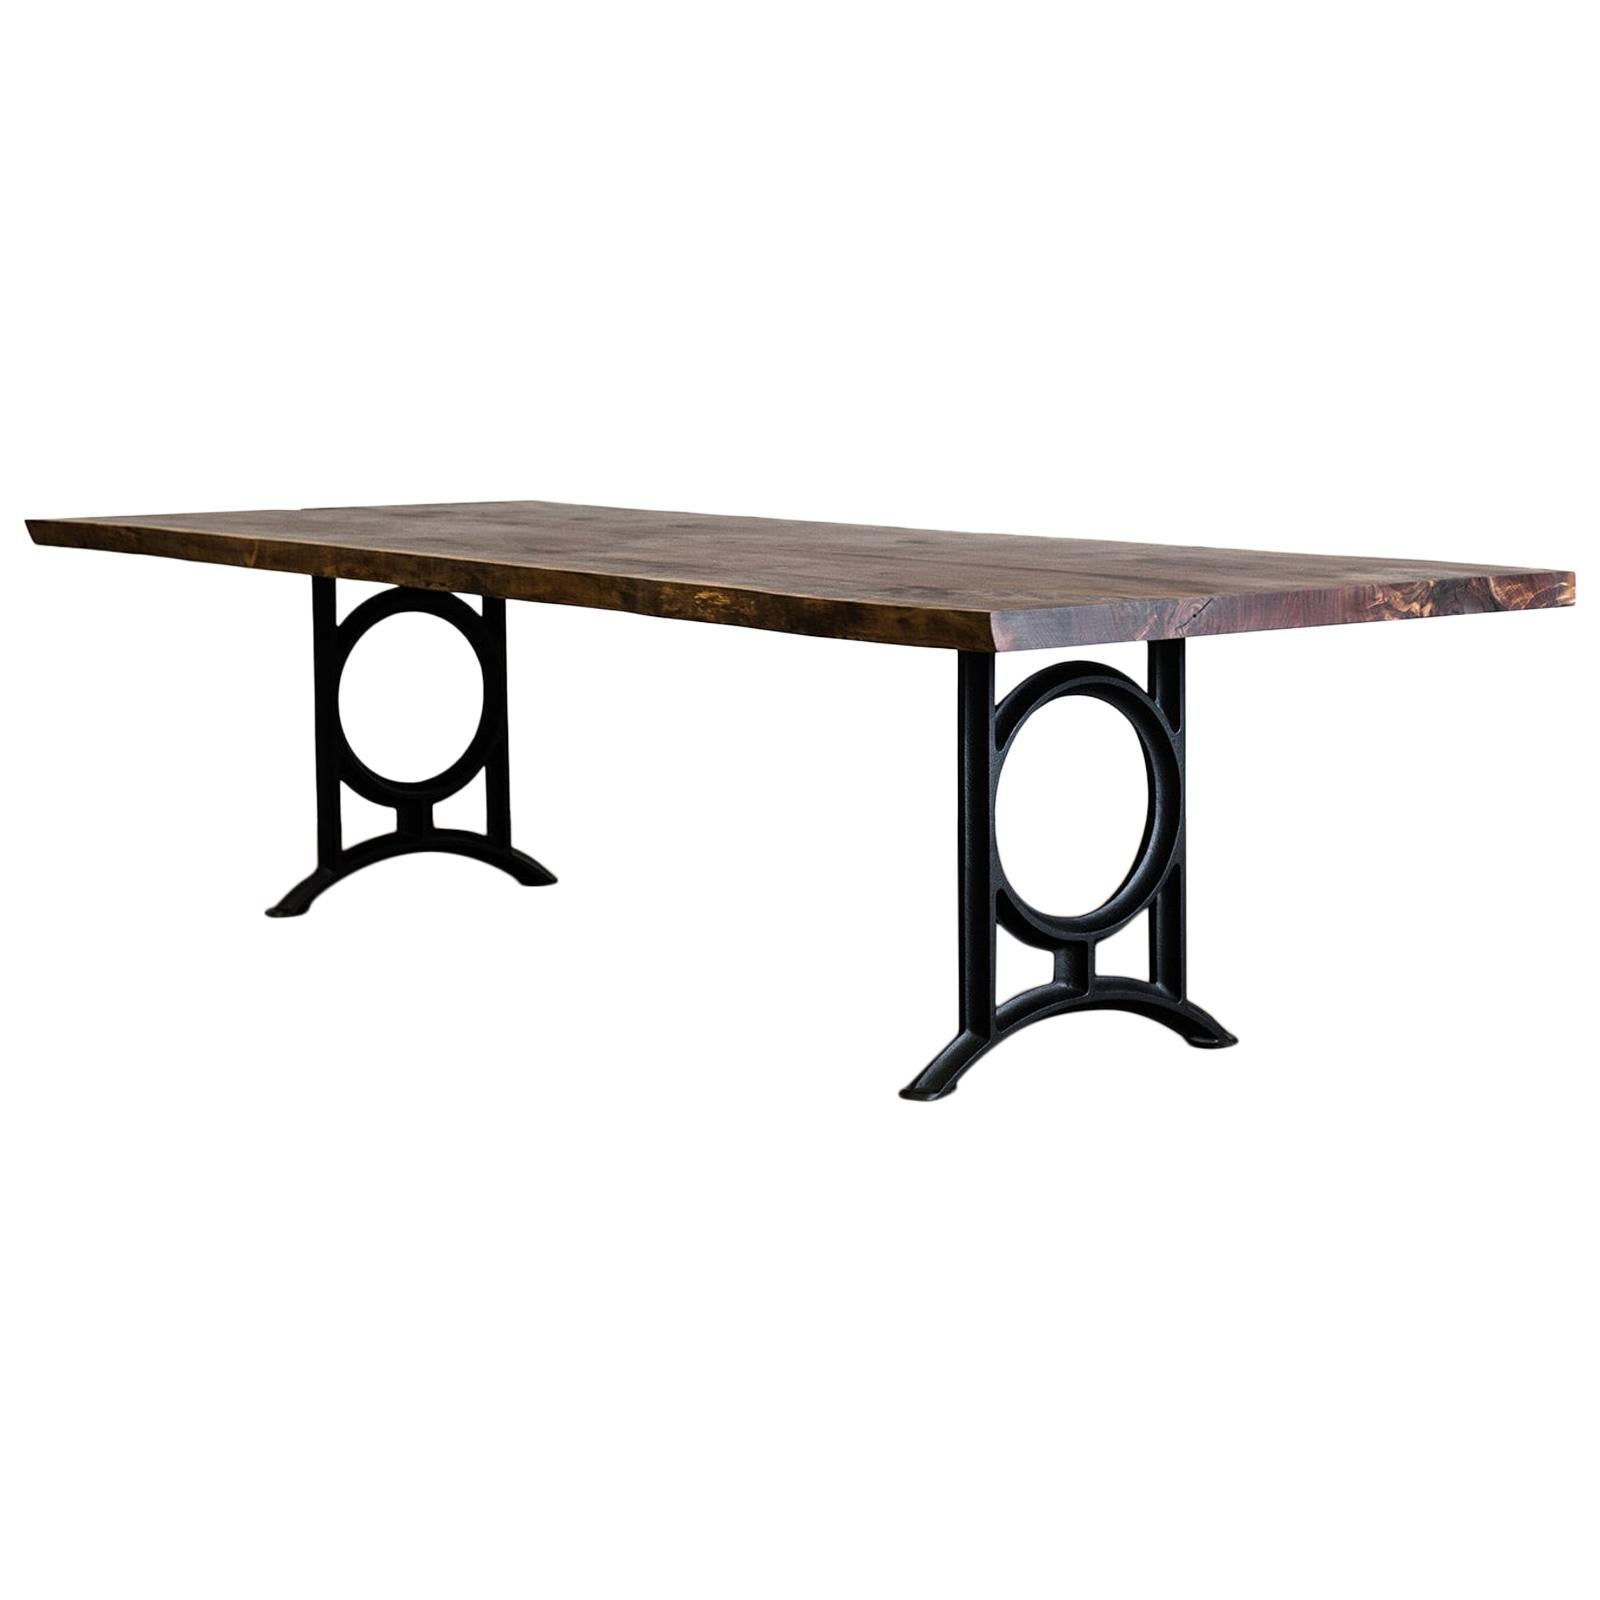 A solid bookmatch of figured black walnut from Oregon. Beautiful figuring in this piece with hand inlayed bowties. The cast iron base is our design and is shown here in black. The table will seat 10-12 people comfortably. 

It is finished with an